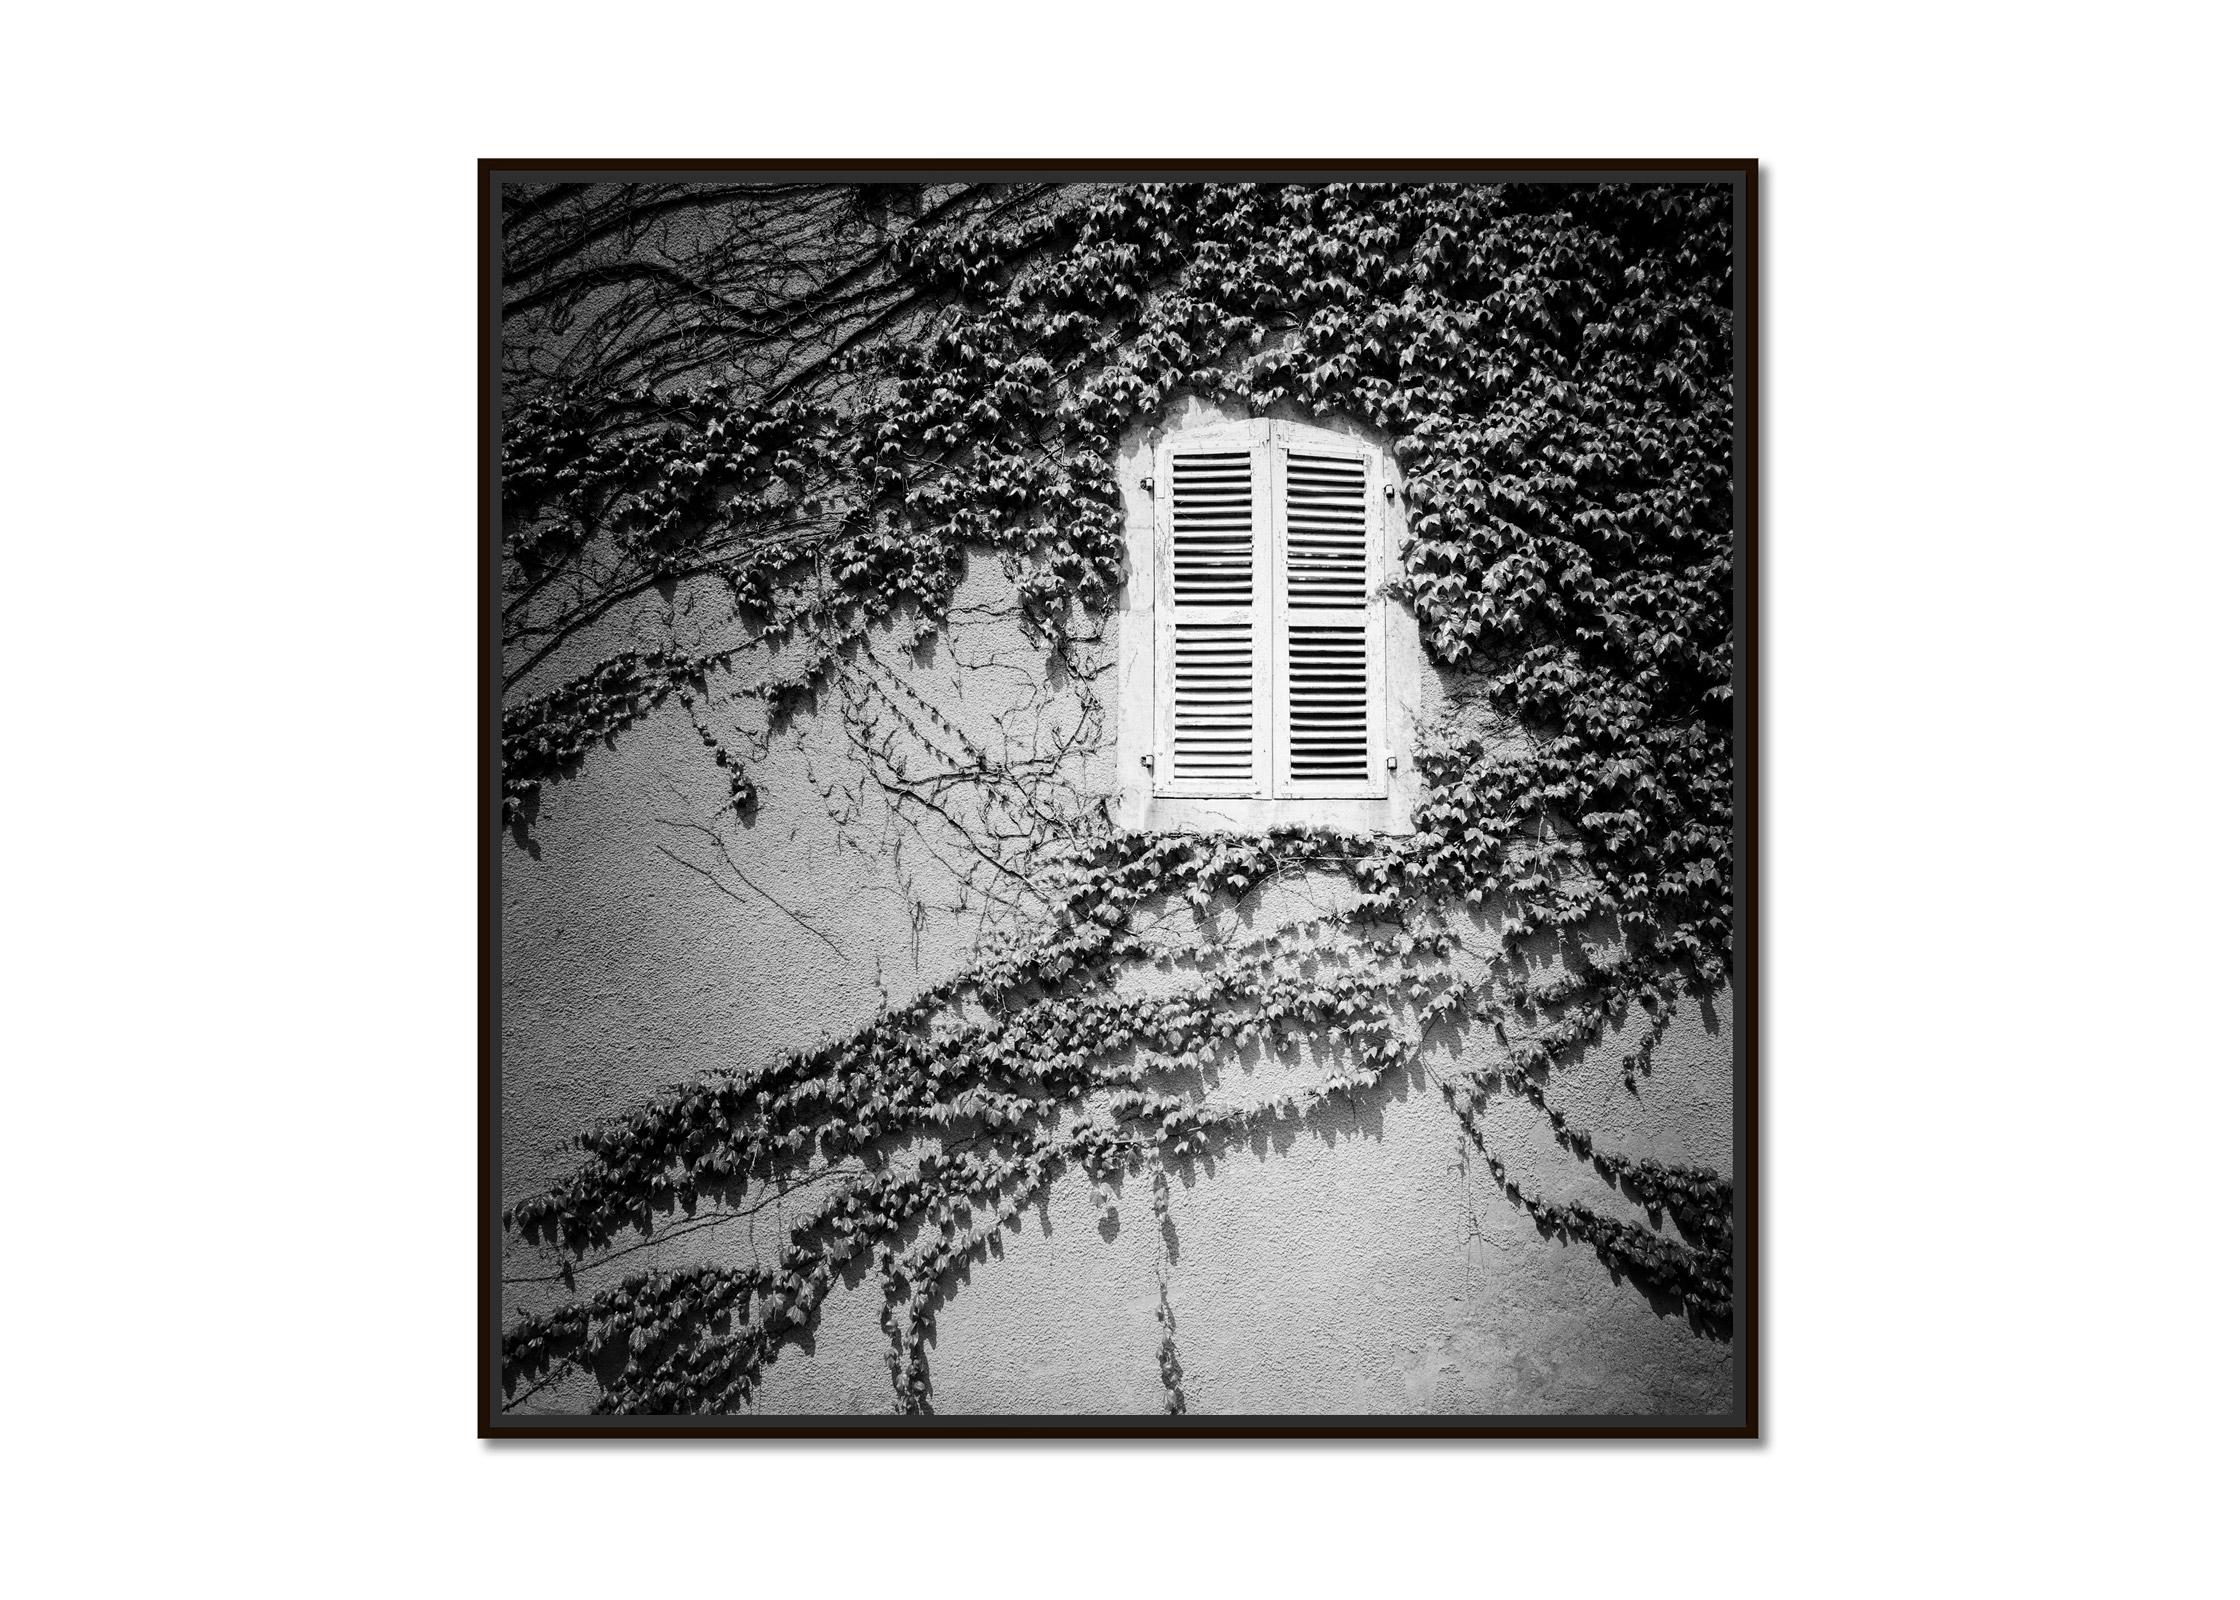 Hedera Helix, France, minimalist, black and white fine art landscape photography - Photograph by Gerald Berghammer